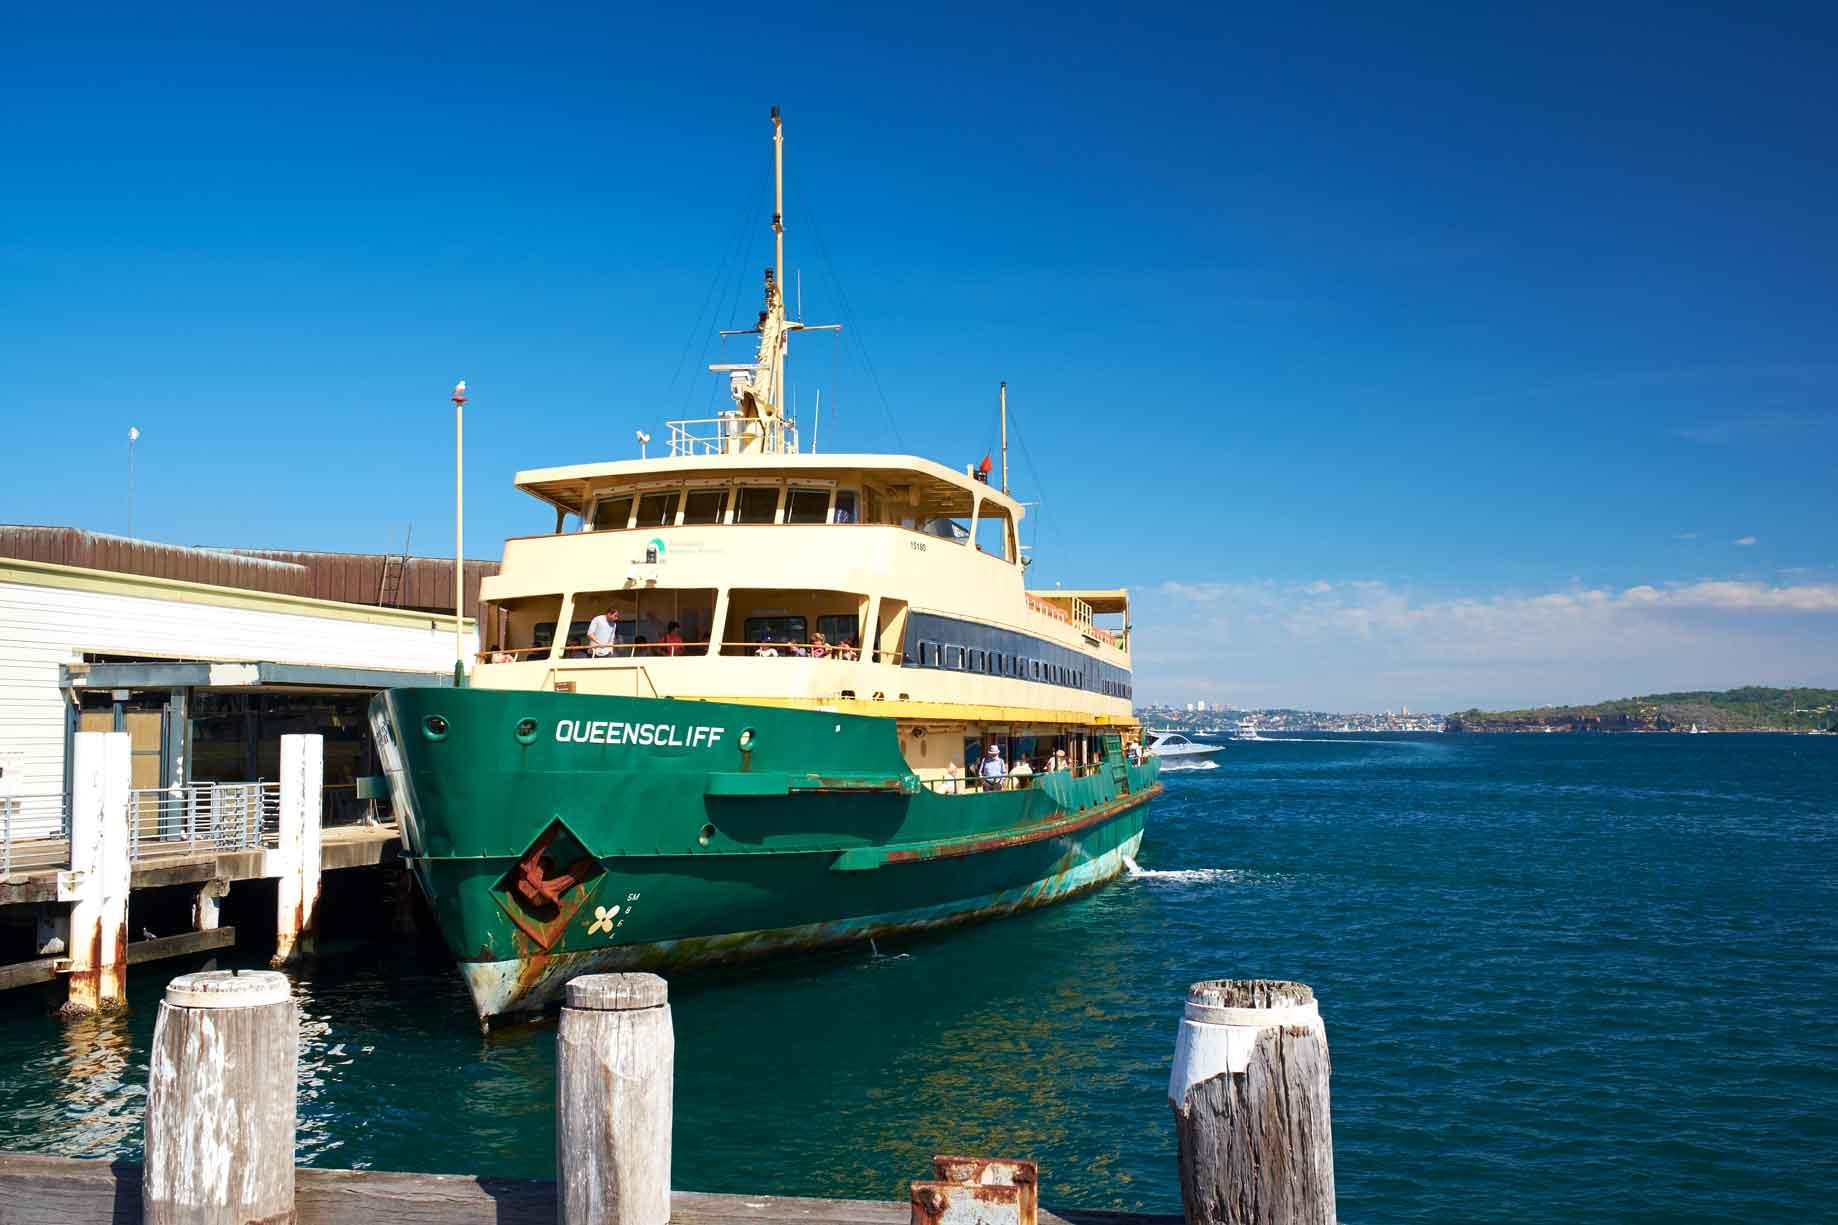 Queenscliff Ferry At Manly Cove